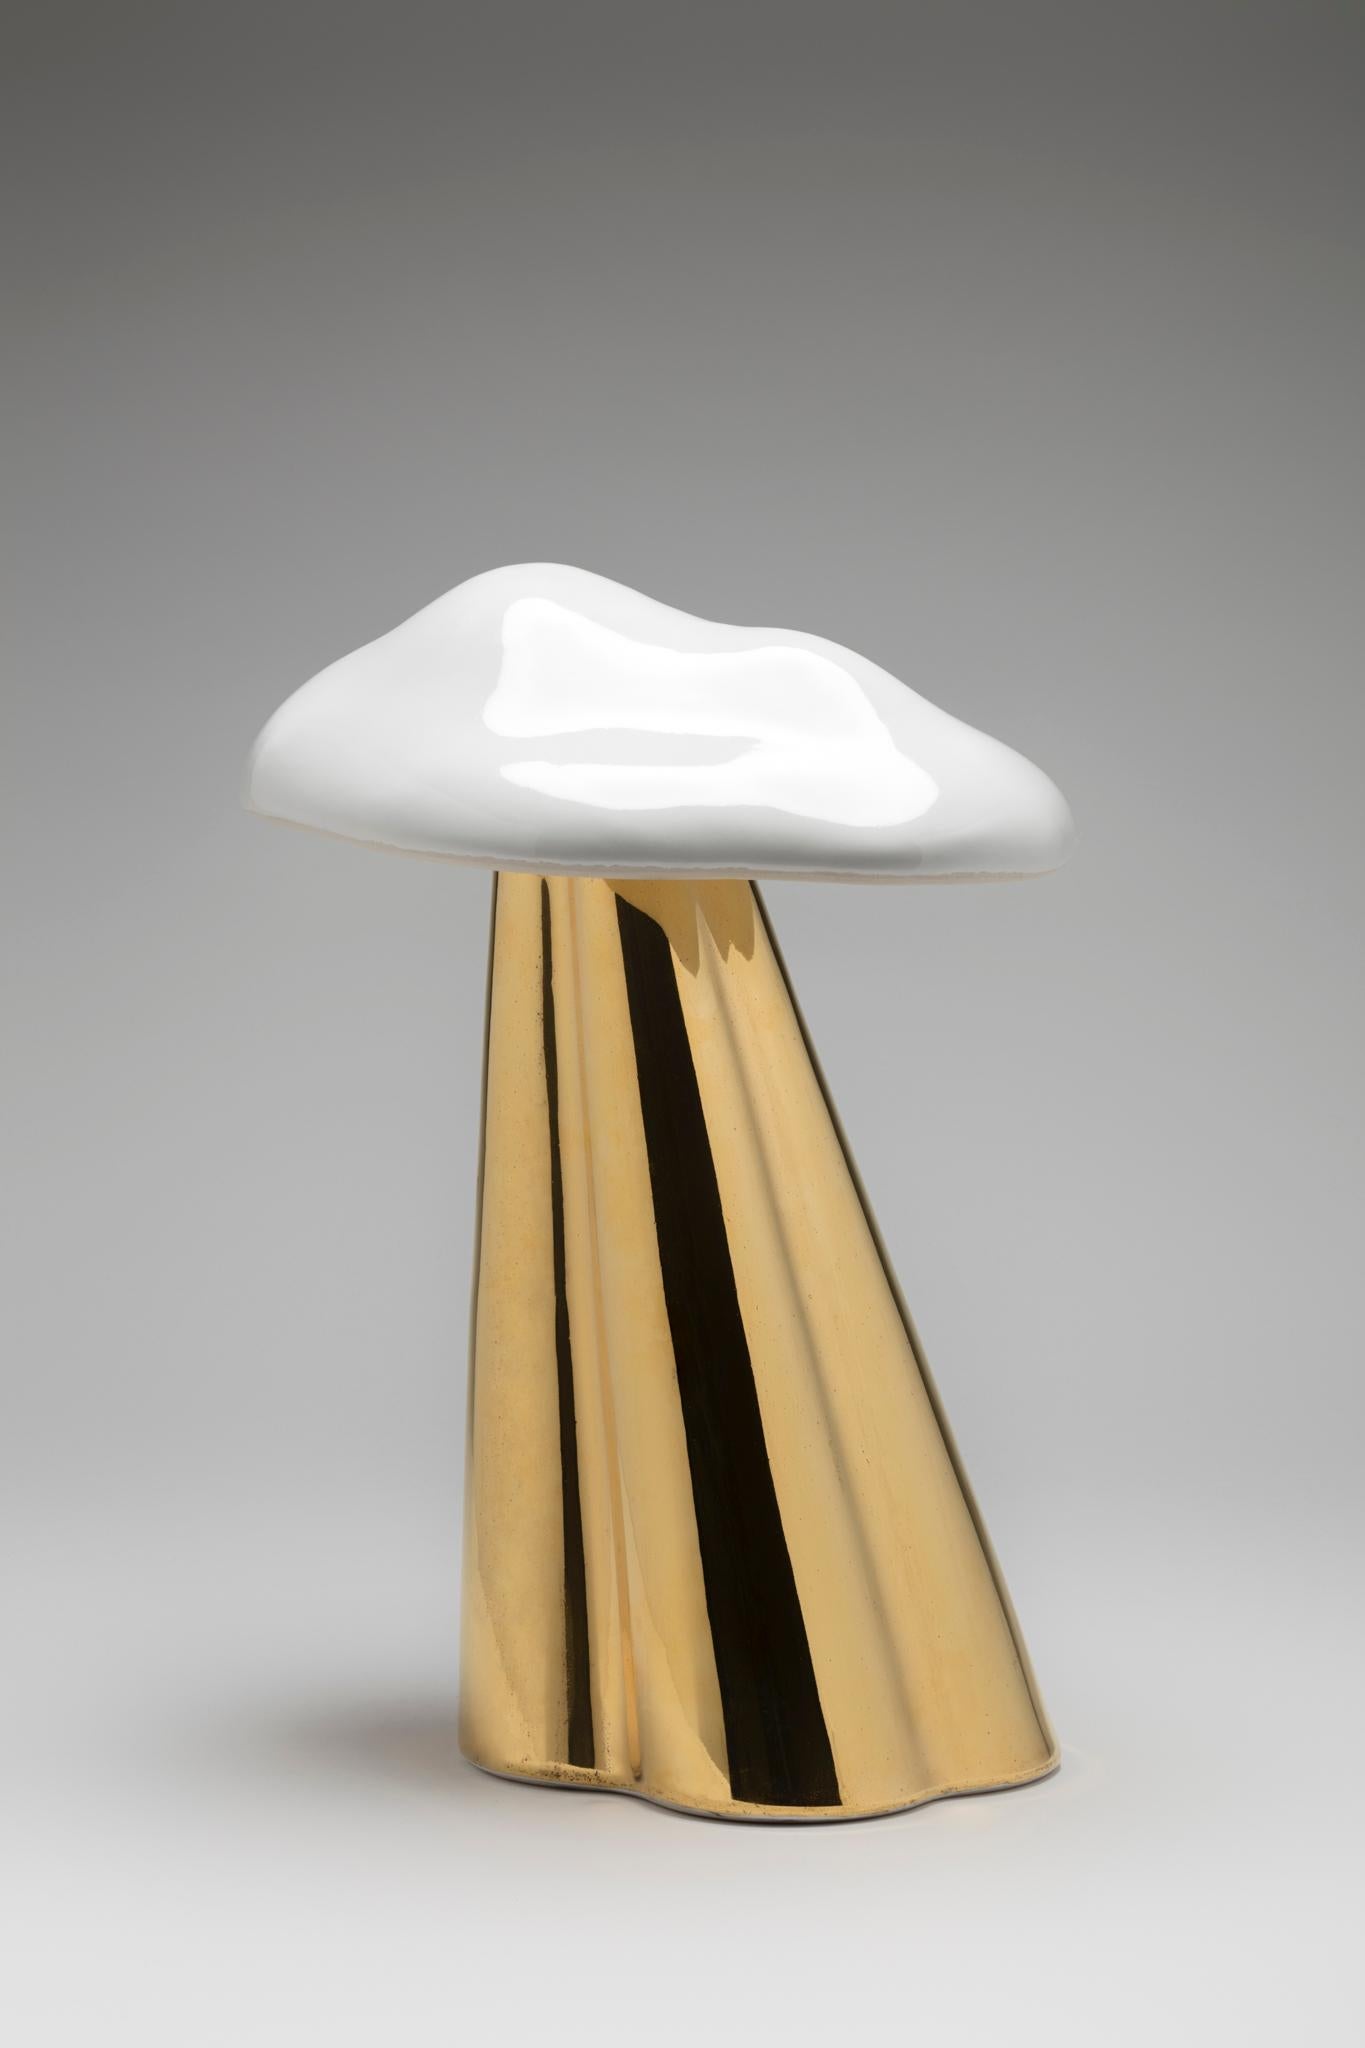 Urns, Nube by Marco Colin for shelf.